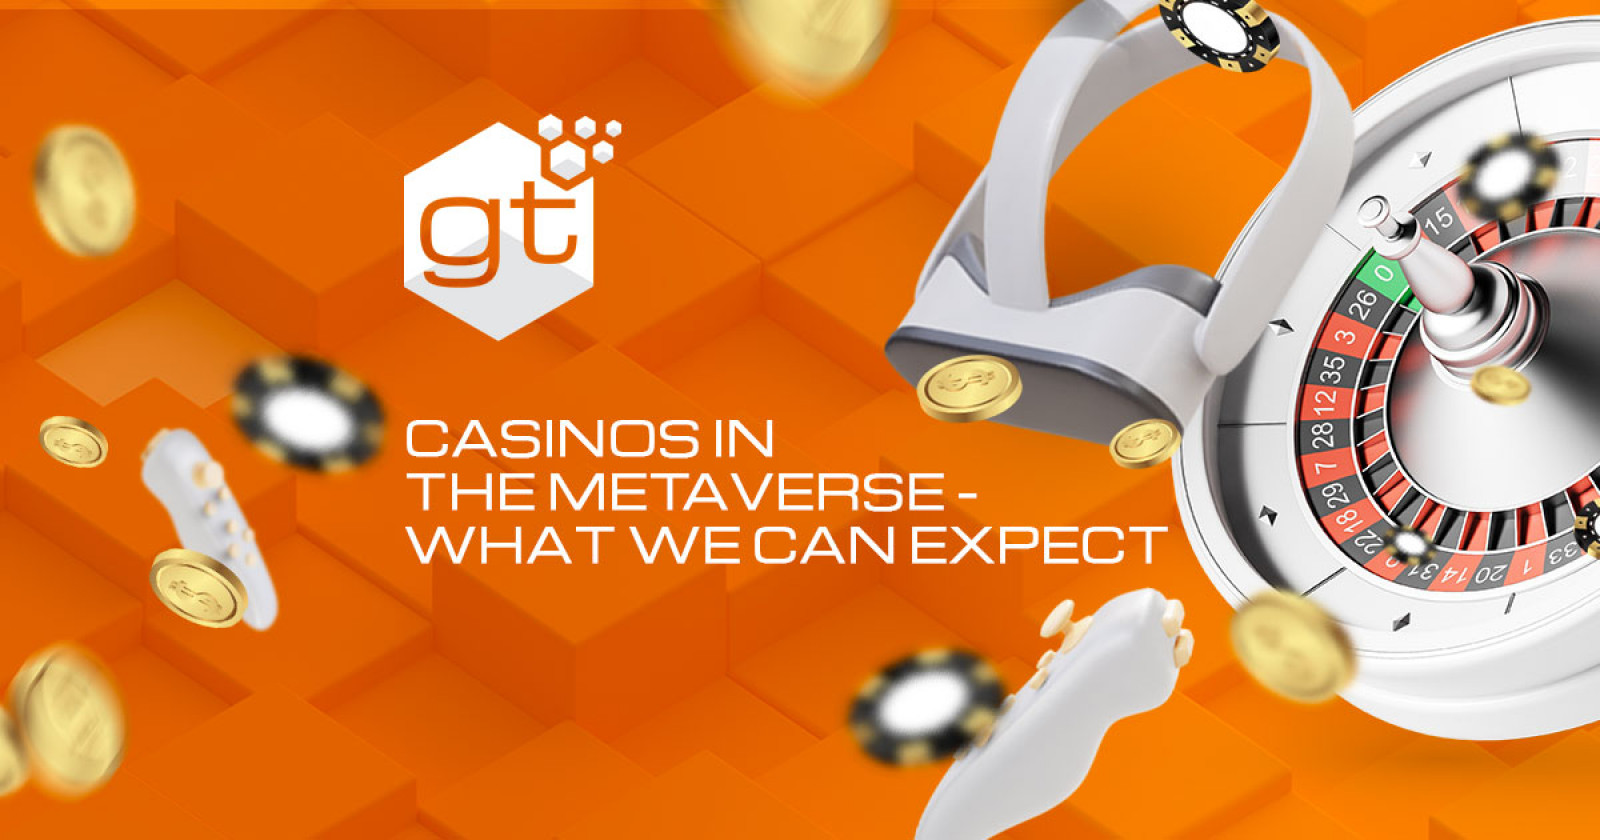 Casinos in the Metaverse: What Can We Expect?